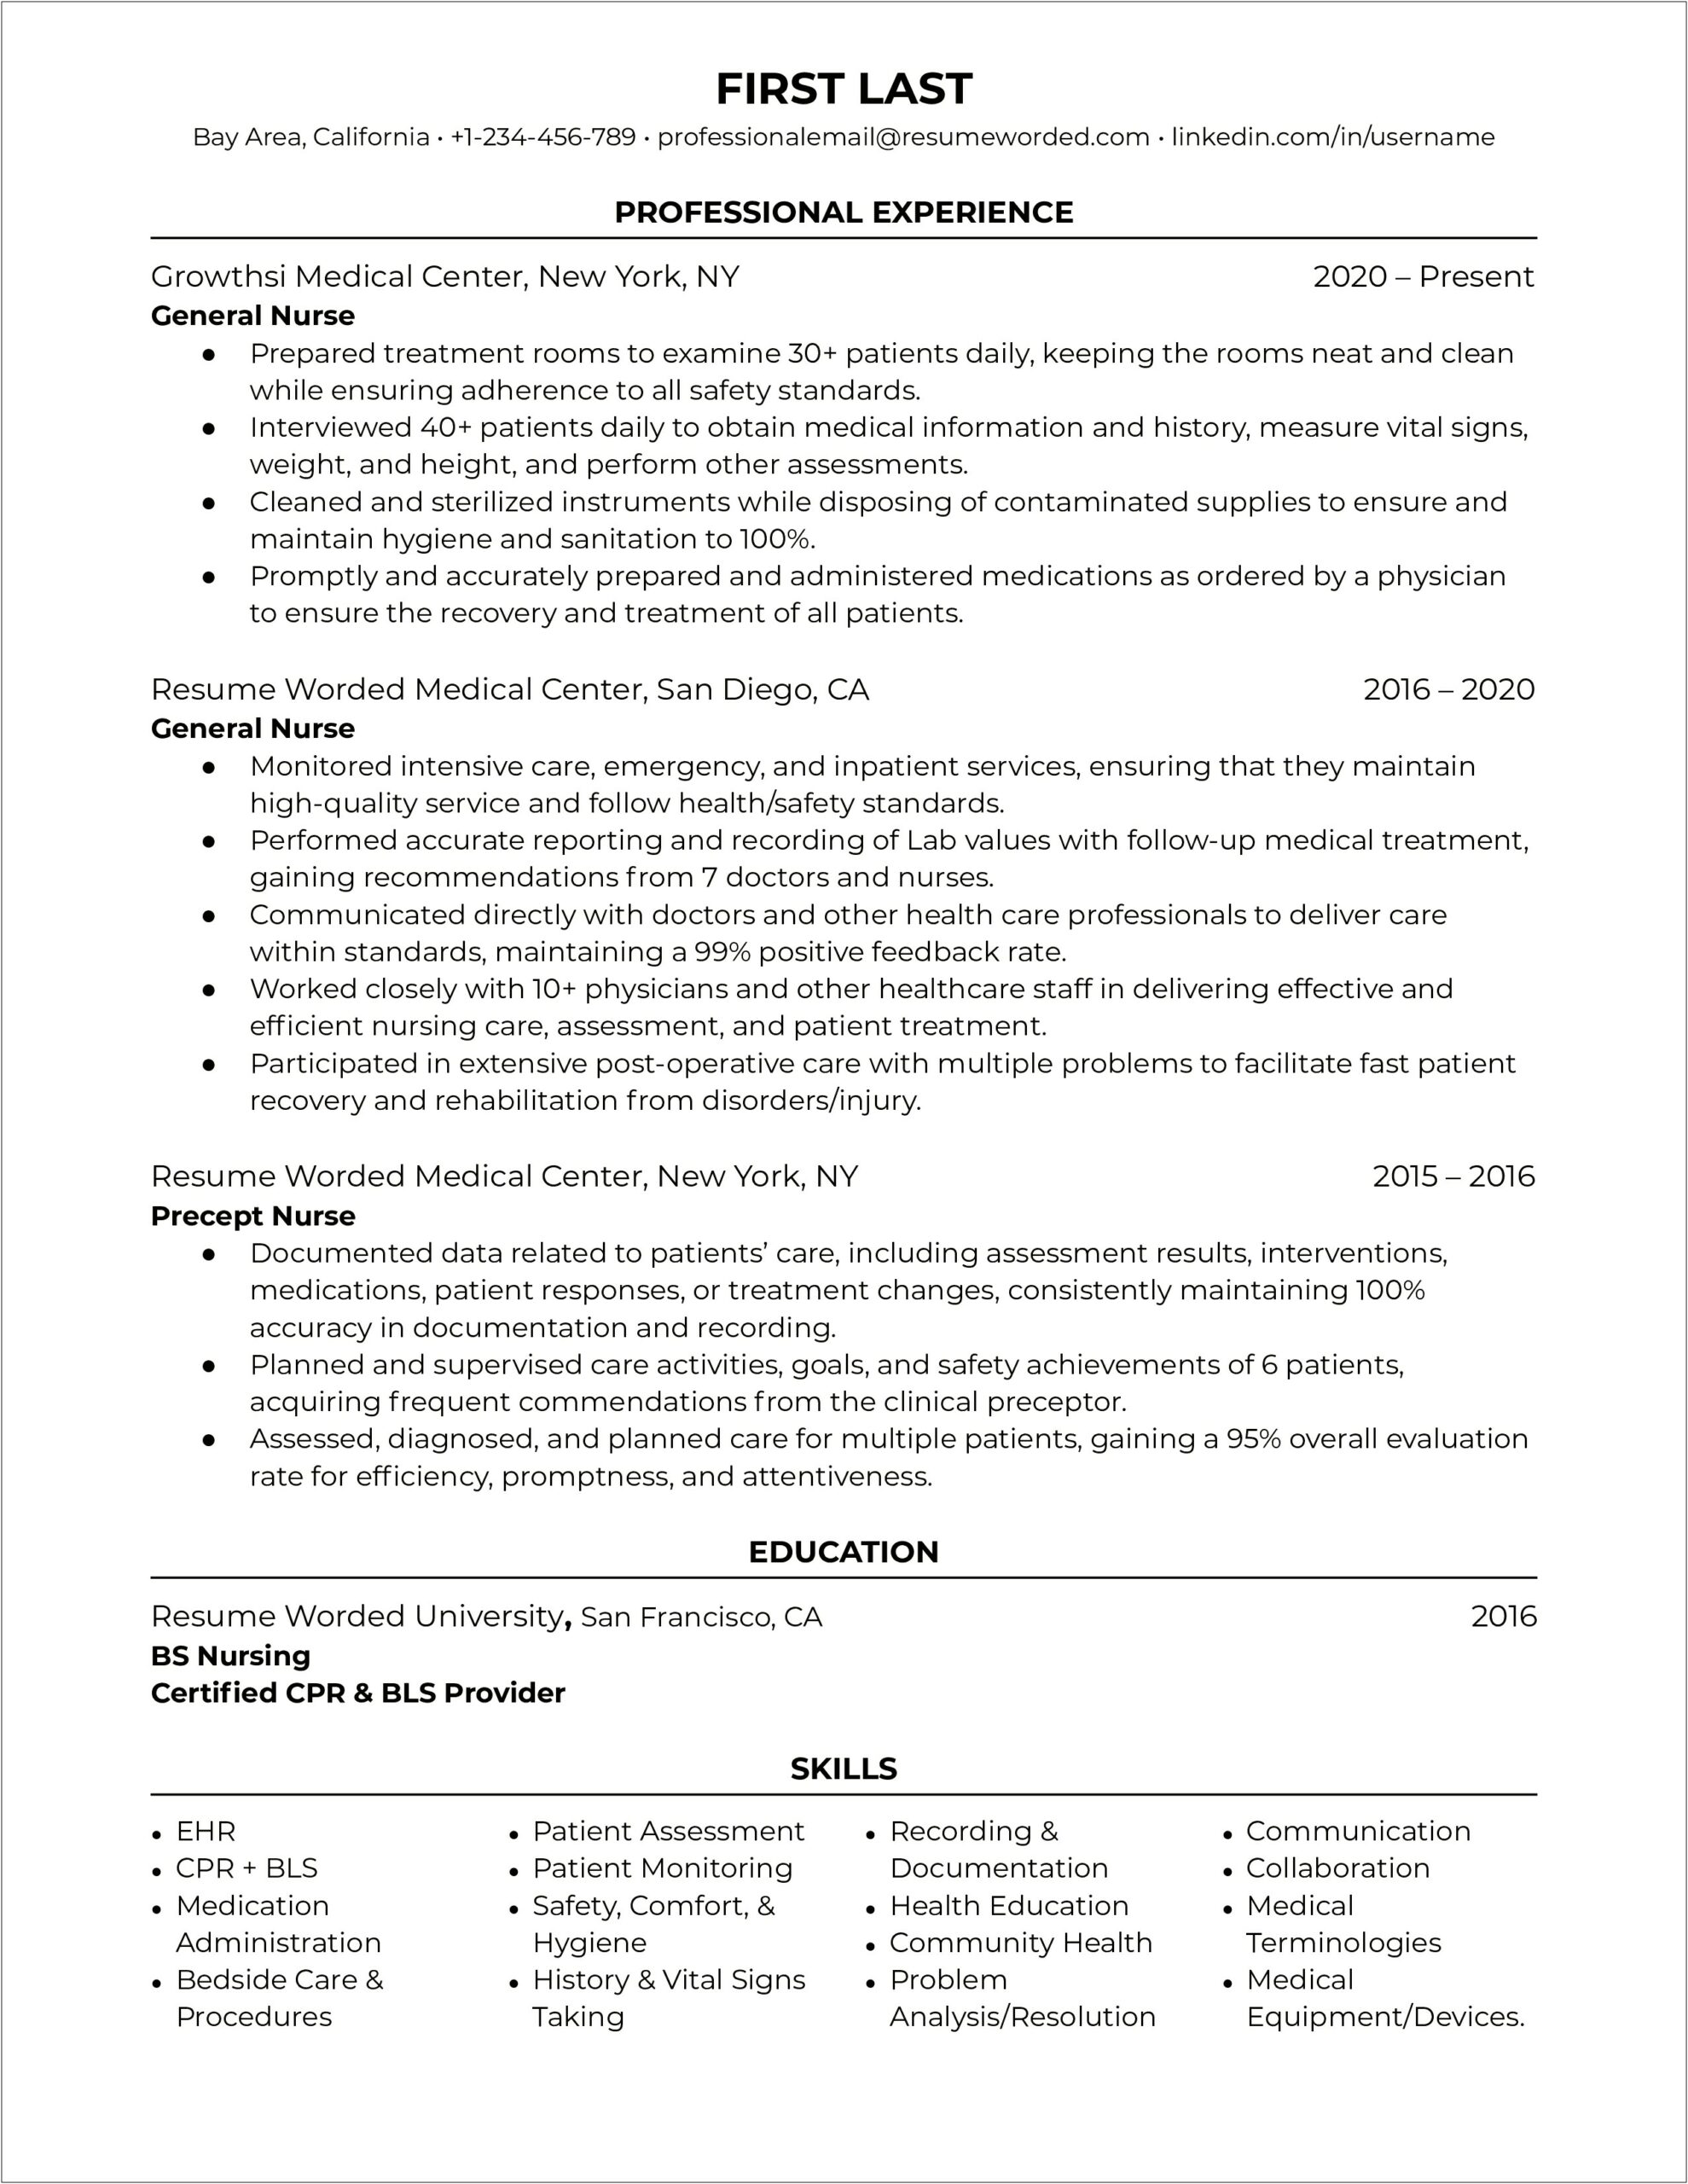 Sample Registered Nurse Resume Without Experience